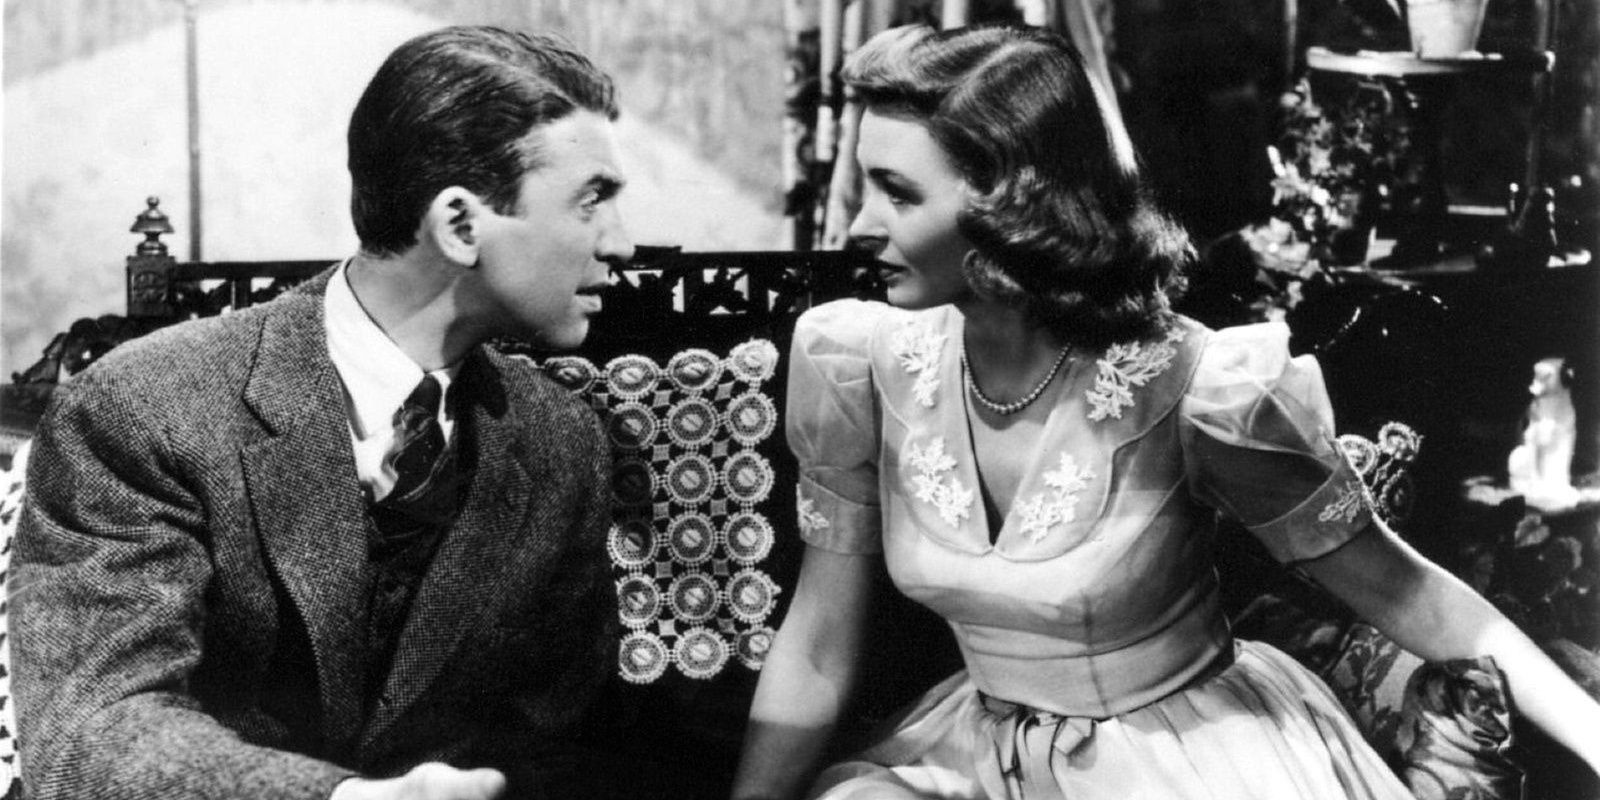 George and Mary in It's a Wonderful Life 